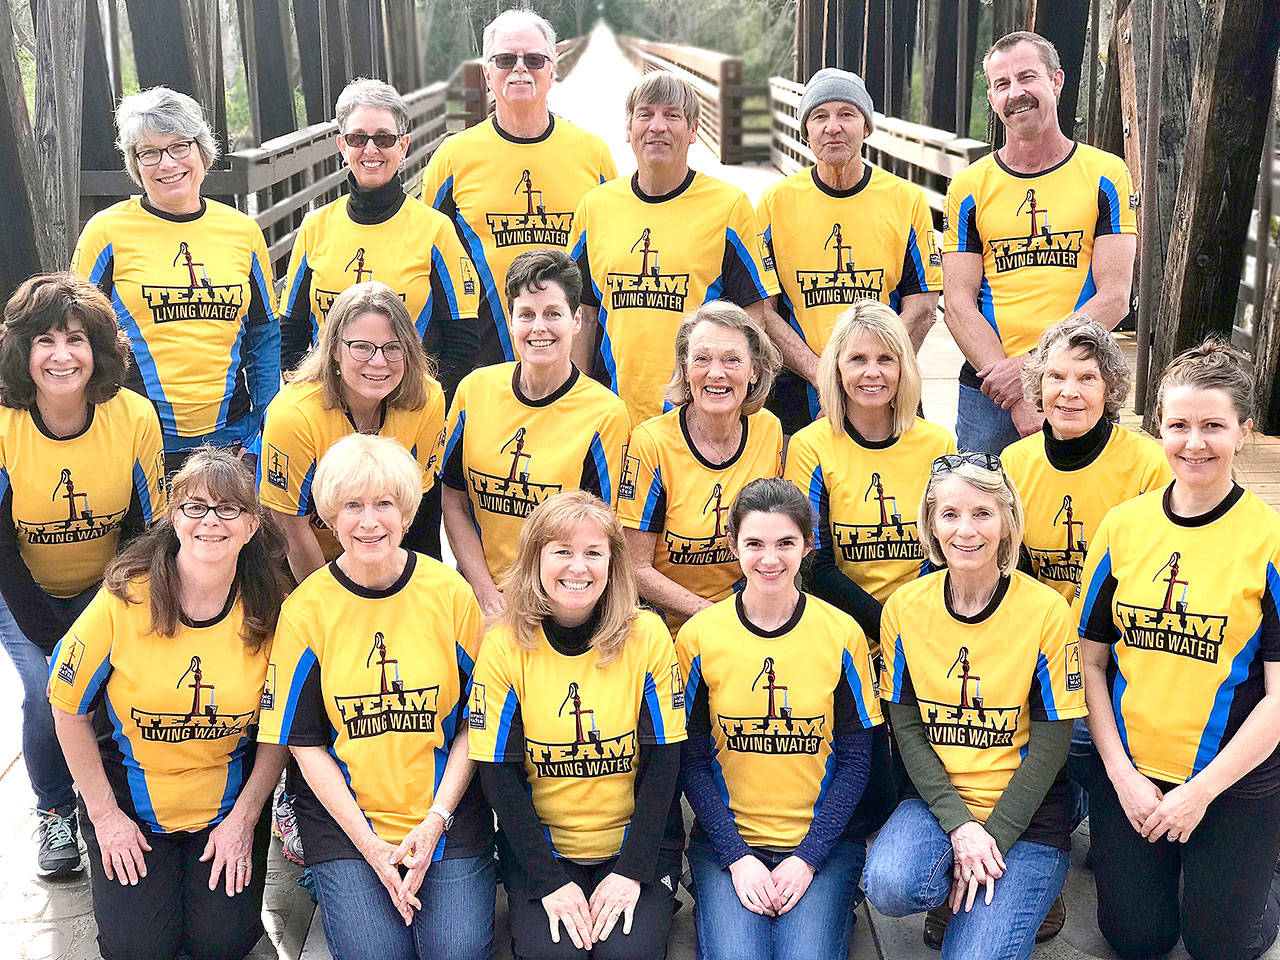 A group from Dungeness Community Church is Sequim is running in the 2018 North Olympic Marathon on June 3 to raise funds for Living Water International so they can build a well and refurbish other wells in Nicaragua. The group is hoping to raise $10,000. From left, front row, are Karen Hill, Carlene Brown, Branette Richards, Stacie Van de Weghe, Linda Keyte and Sarah Winfield. From left, middle row, are Chris Miner, Jennie Forgerg, Molly Omann, Judy Boissevain, Cherie Hendrickson and Carlene Moberg. From left, back row, are Barb Bentley, Rosalie Di Maggio, Martin Murray, Al Chrisman, Kevin Magner and Brian Omann. Team members not in the photo are Kate Hall, Anna Swanberg, Jeanette Gish, Selina Miller, Deanna McComas, Kelin Schaafsma, Kim Mason, Allison Palmer, Jeremiah Collins and Julie Hill.                                A group from Dungeness Community Church in Sequim is running in the 2018 North Olympic Marathon on June 3 to raise funds for Living Water International so they can build a well and refurbish other wells in Nicaragua. The group hopes to raise $10,000.